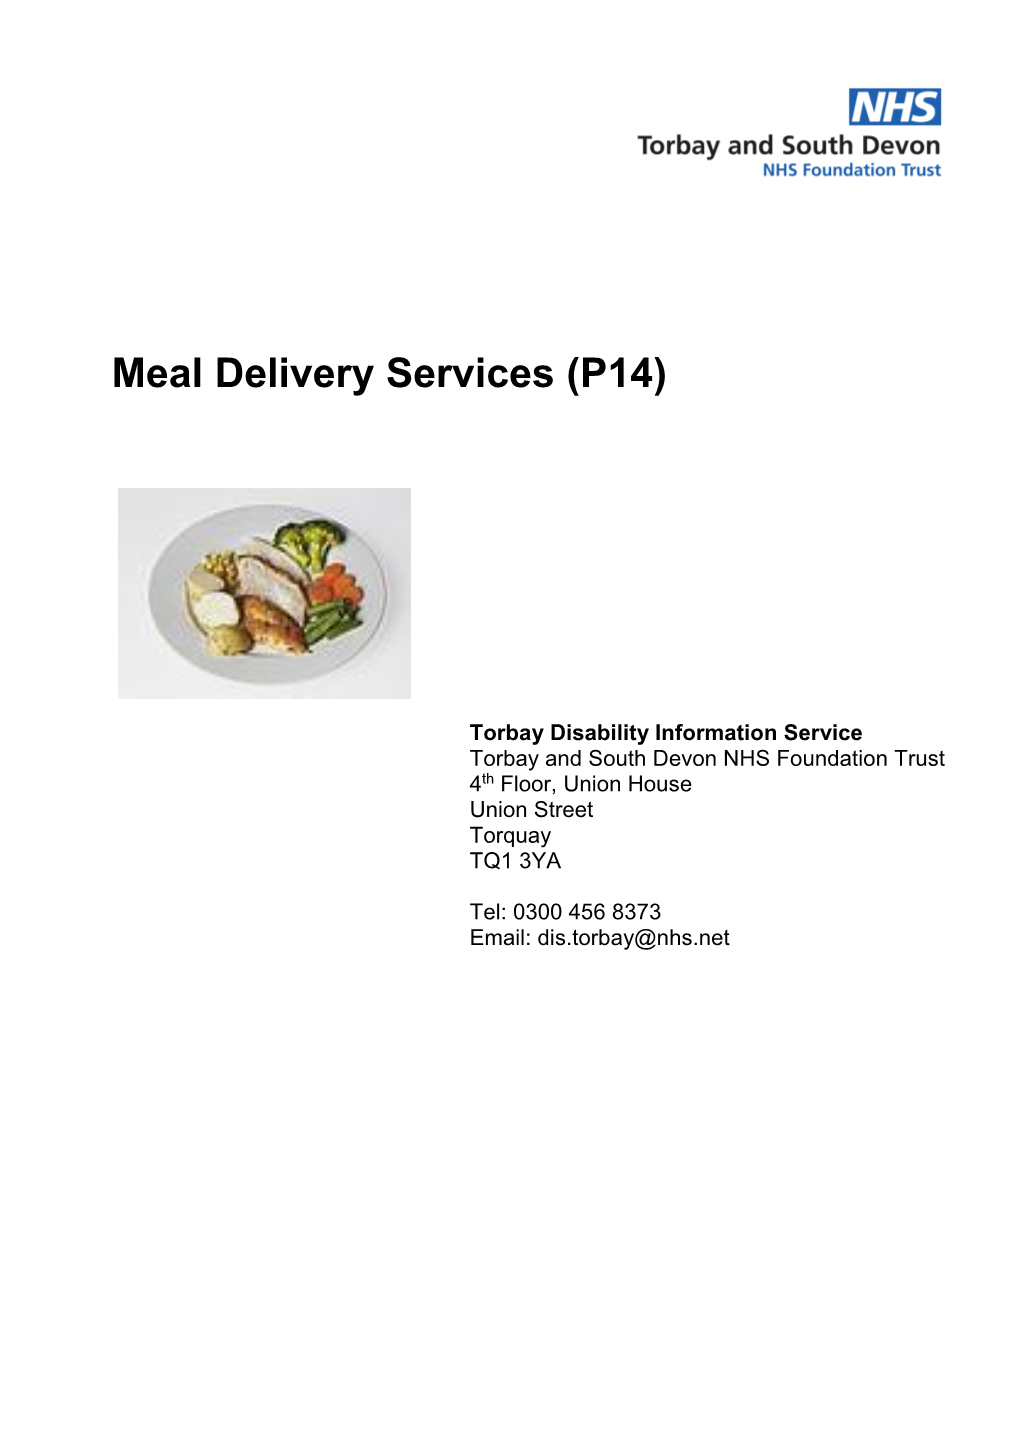 Meal Delivery Services (P14)